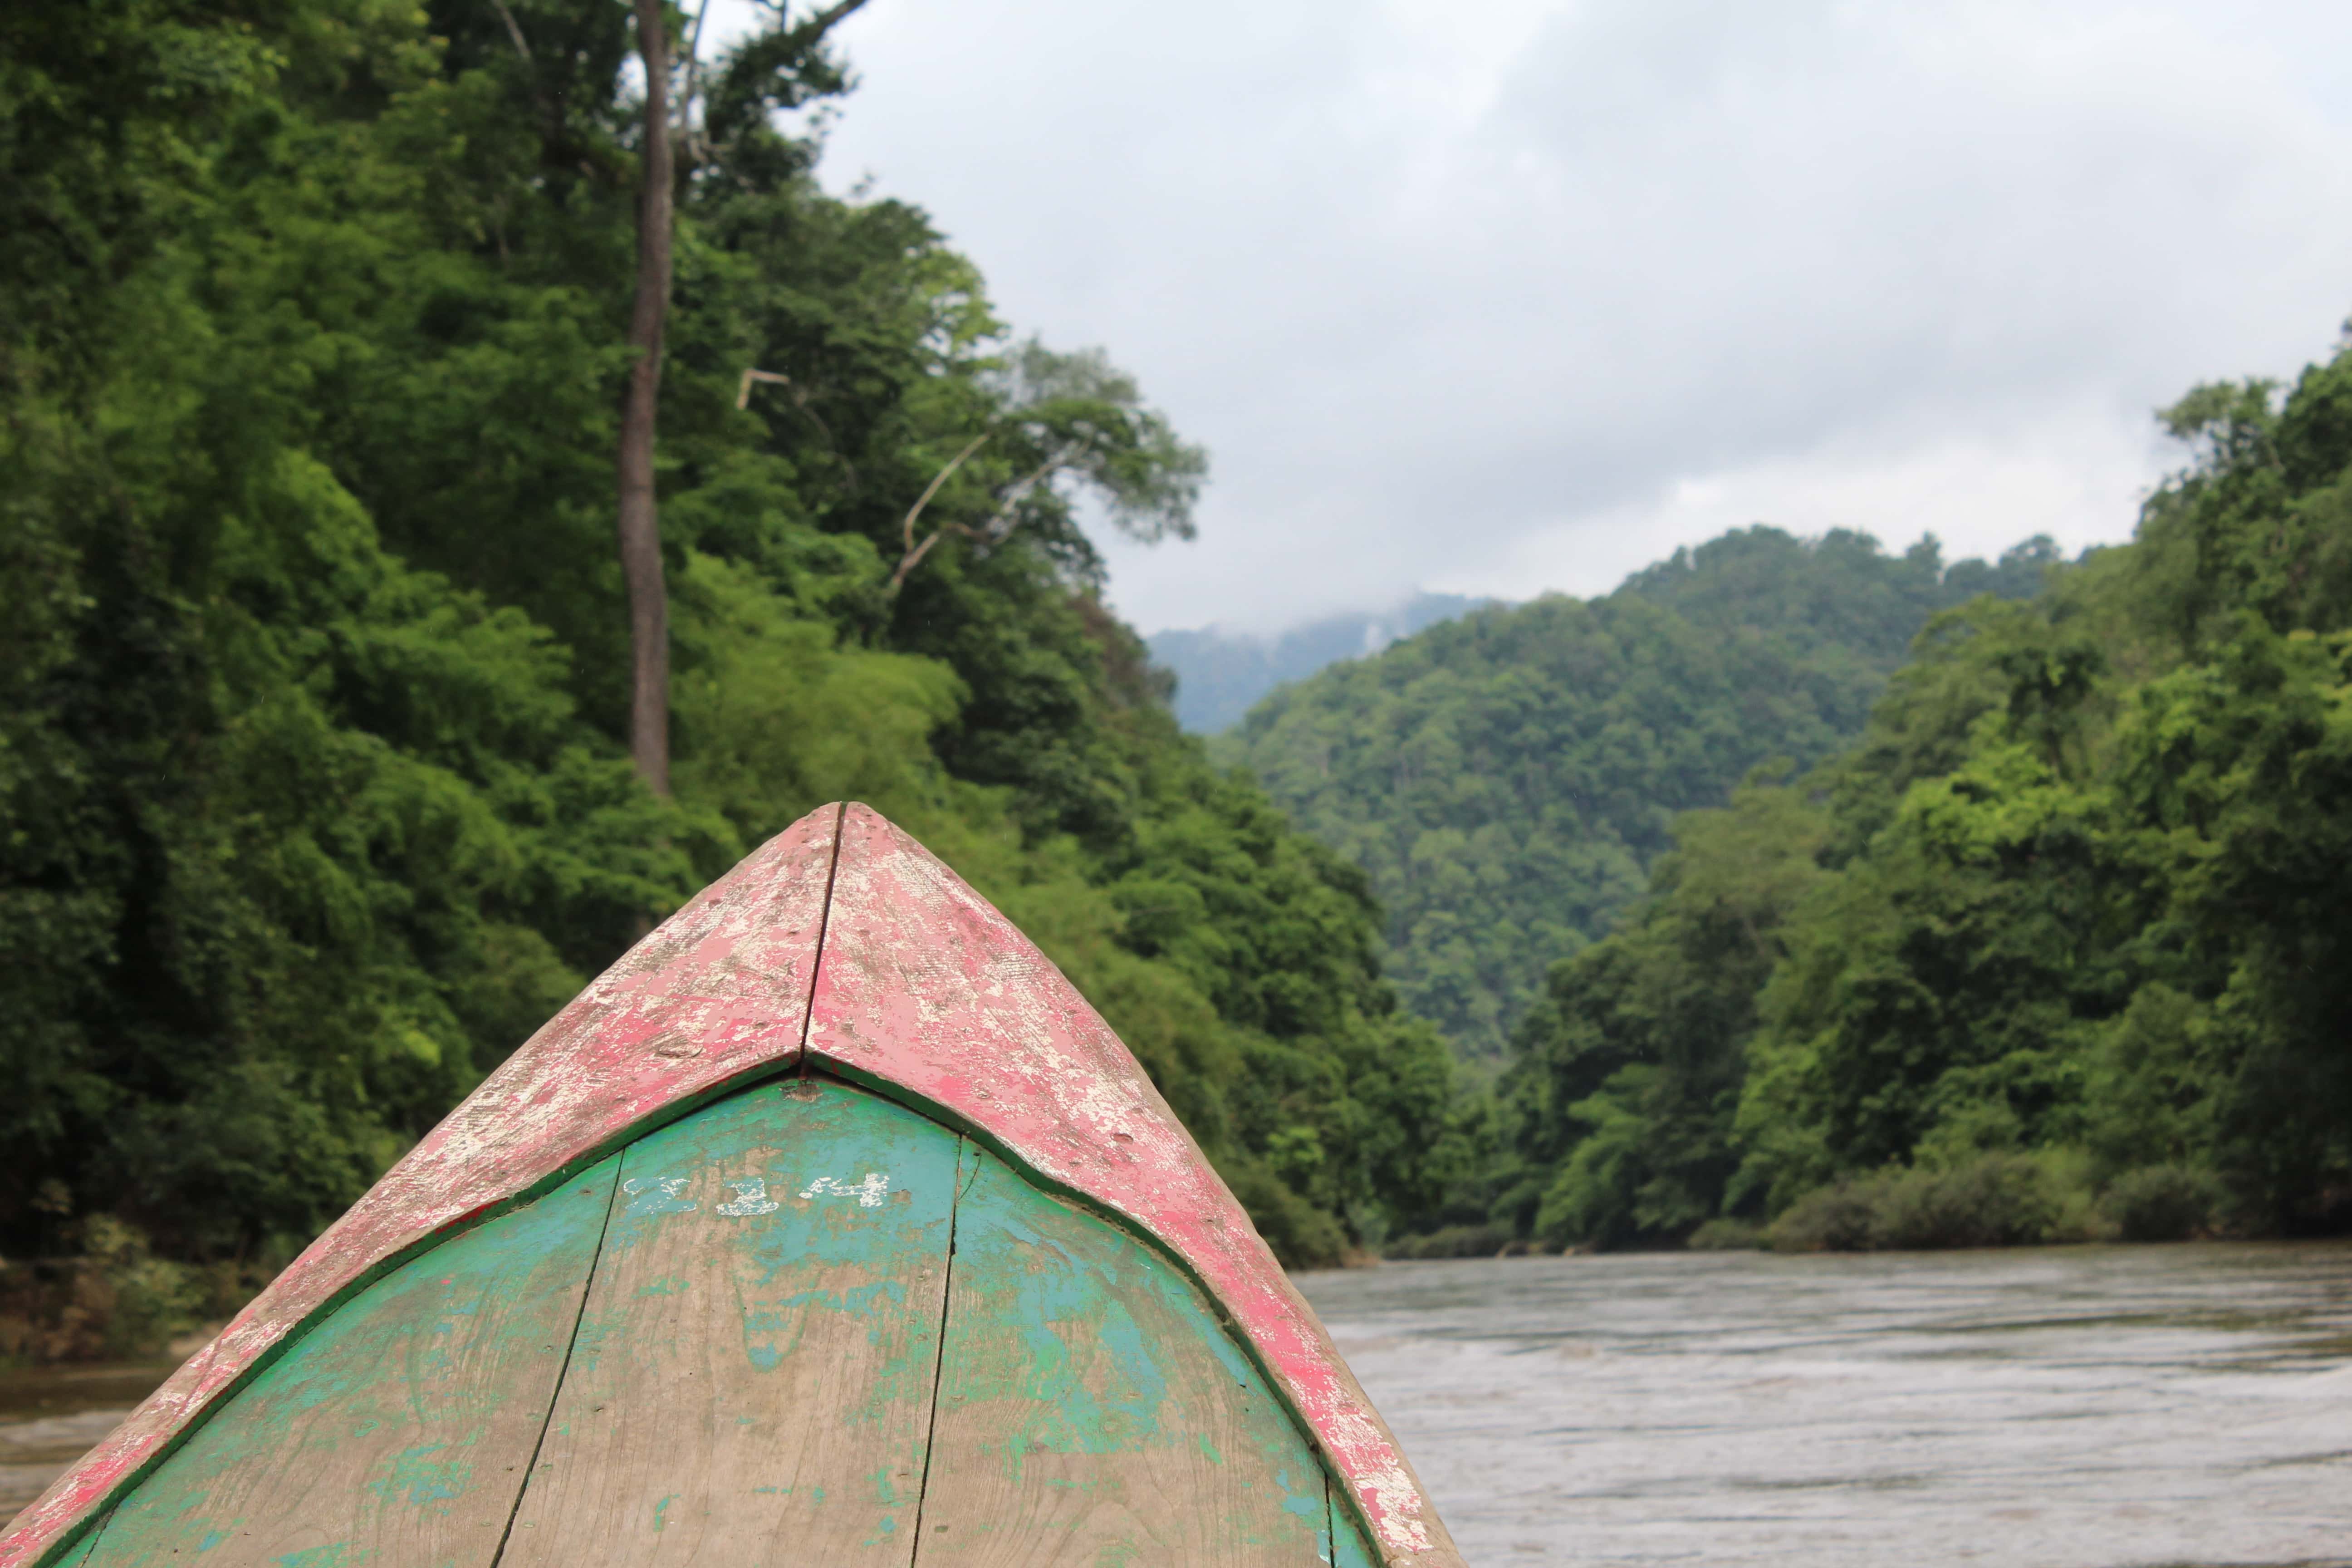 Bow of boat with a background of the river and surrounding forest